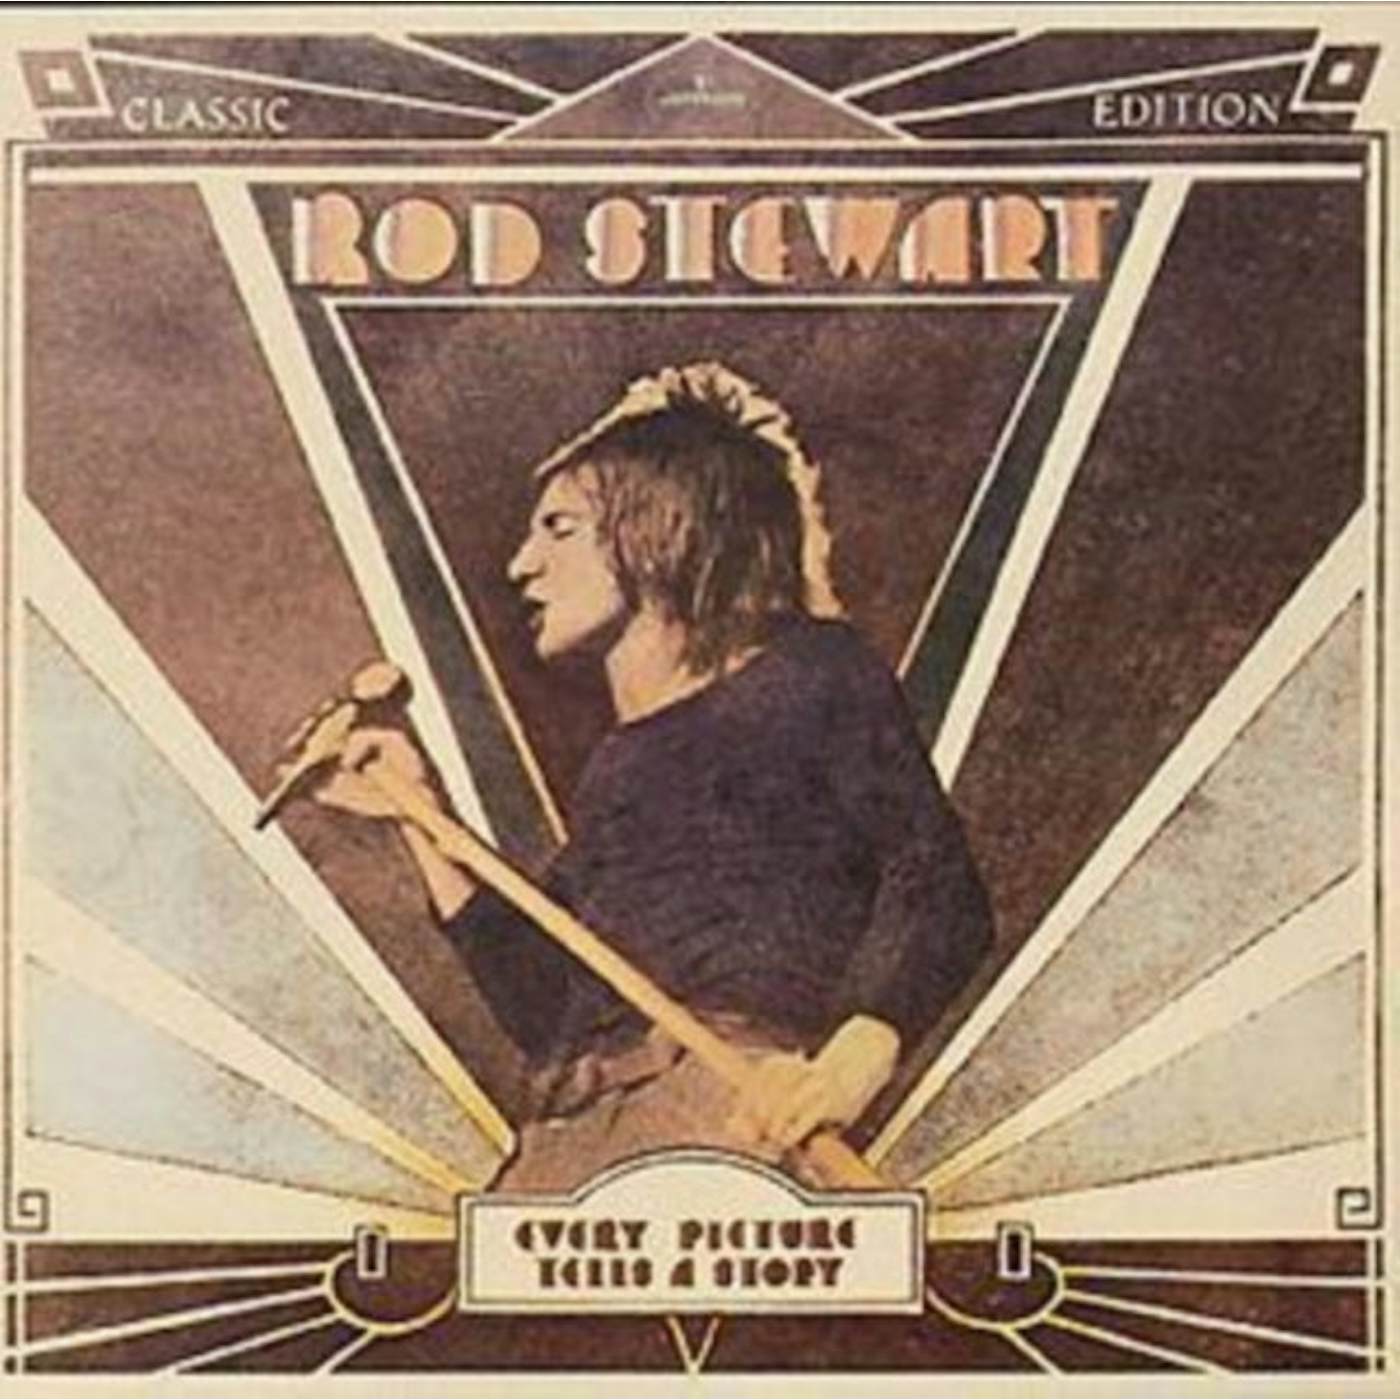 Rod Stewart CD - Every Picture Tells A Story